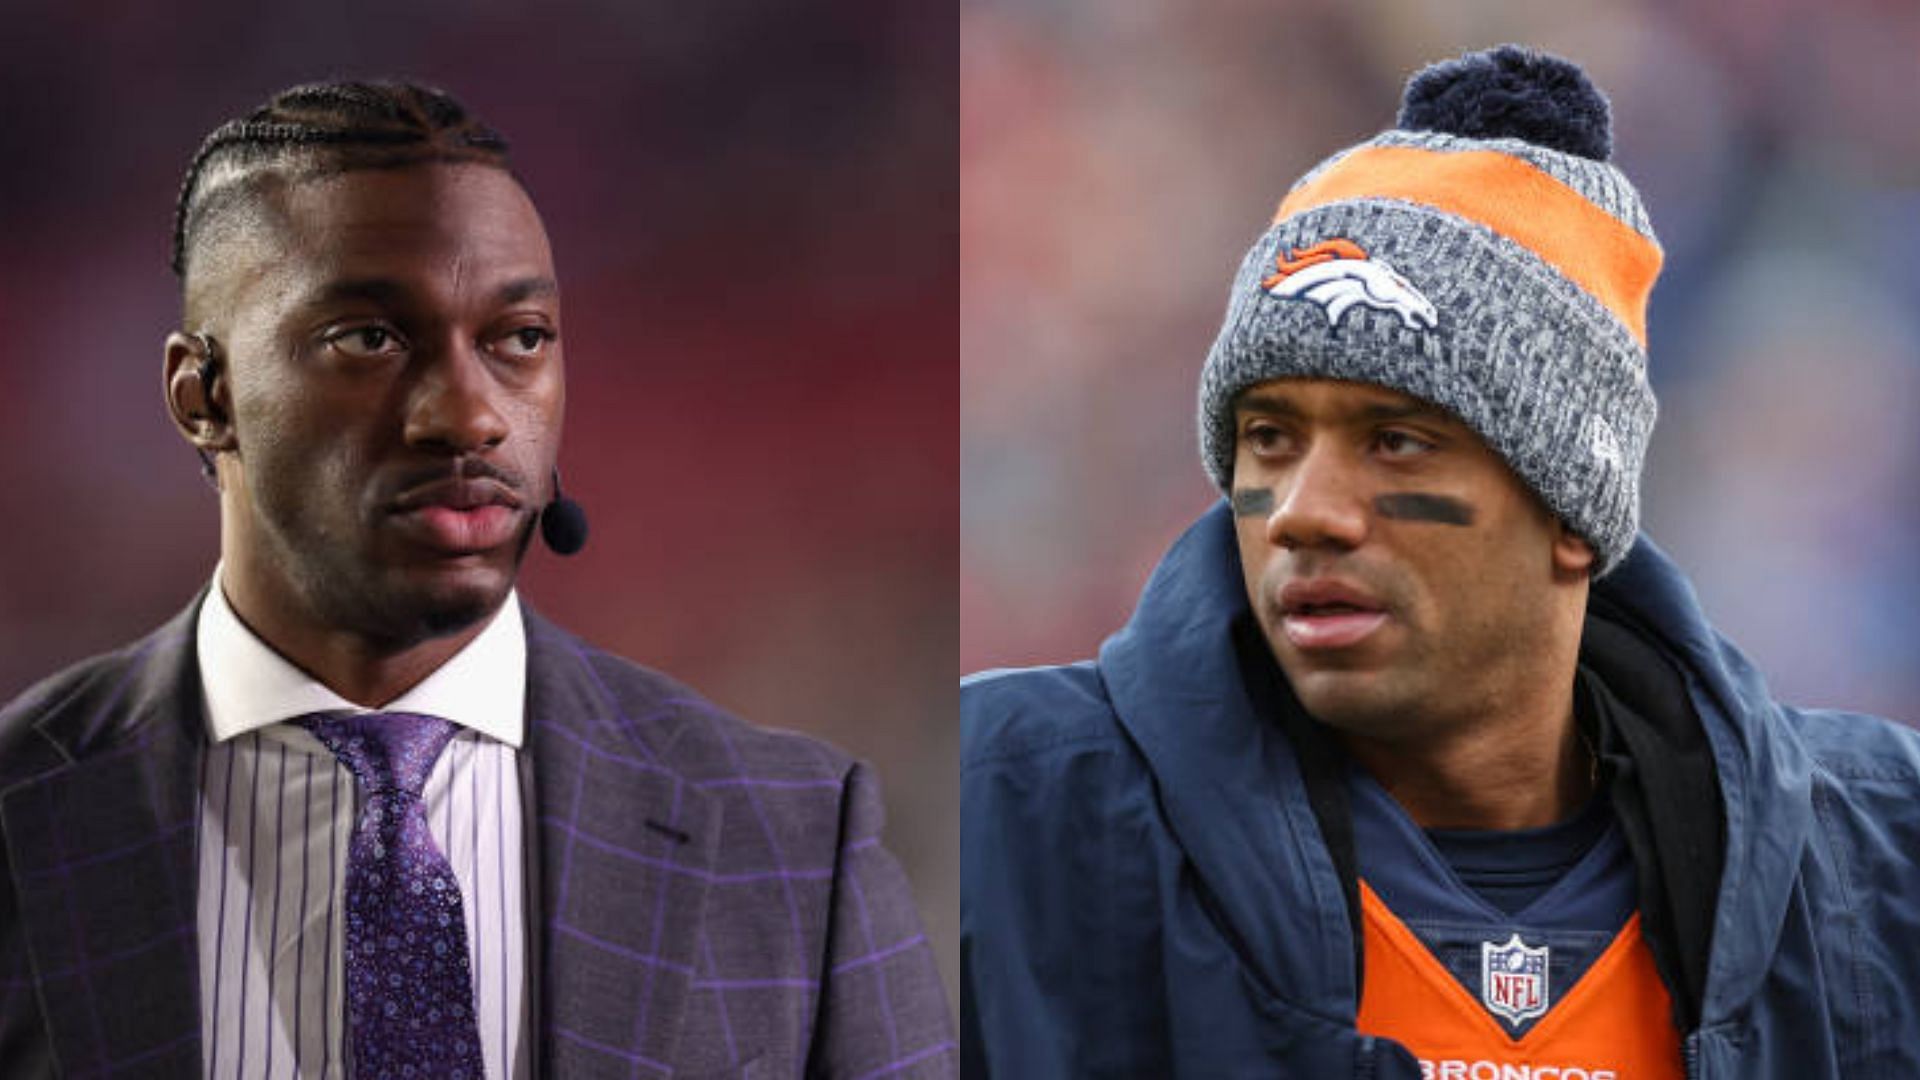 Robert Griffin III has some thoughts about the Denver Broncos treatment of Russell Wison.